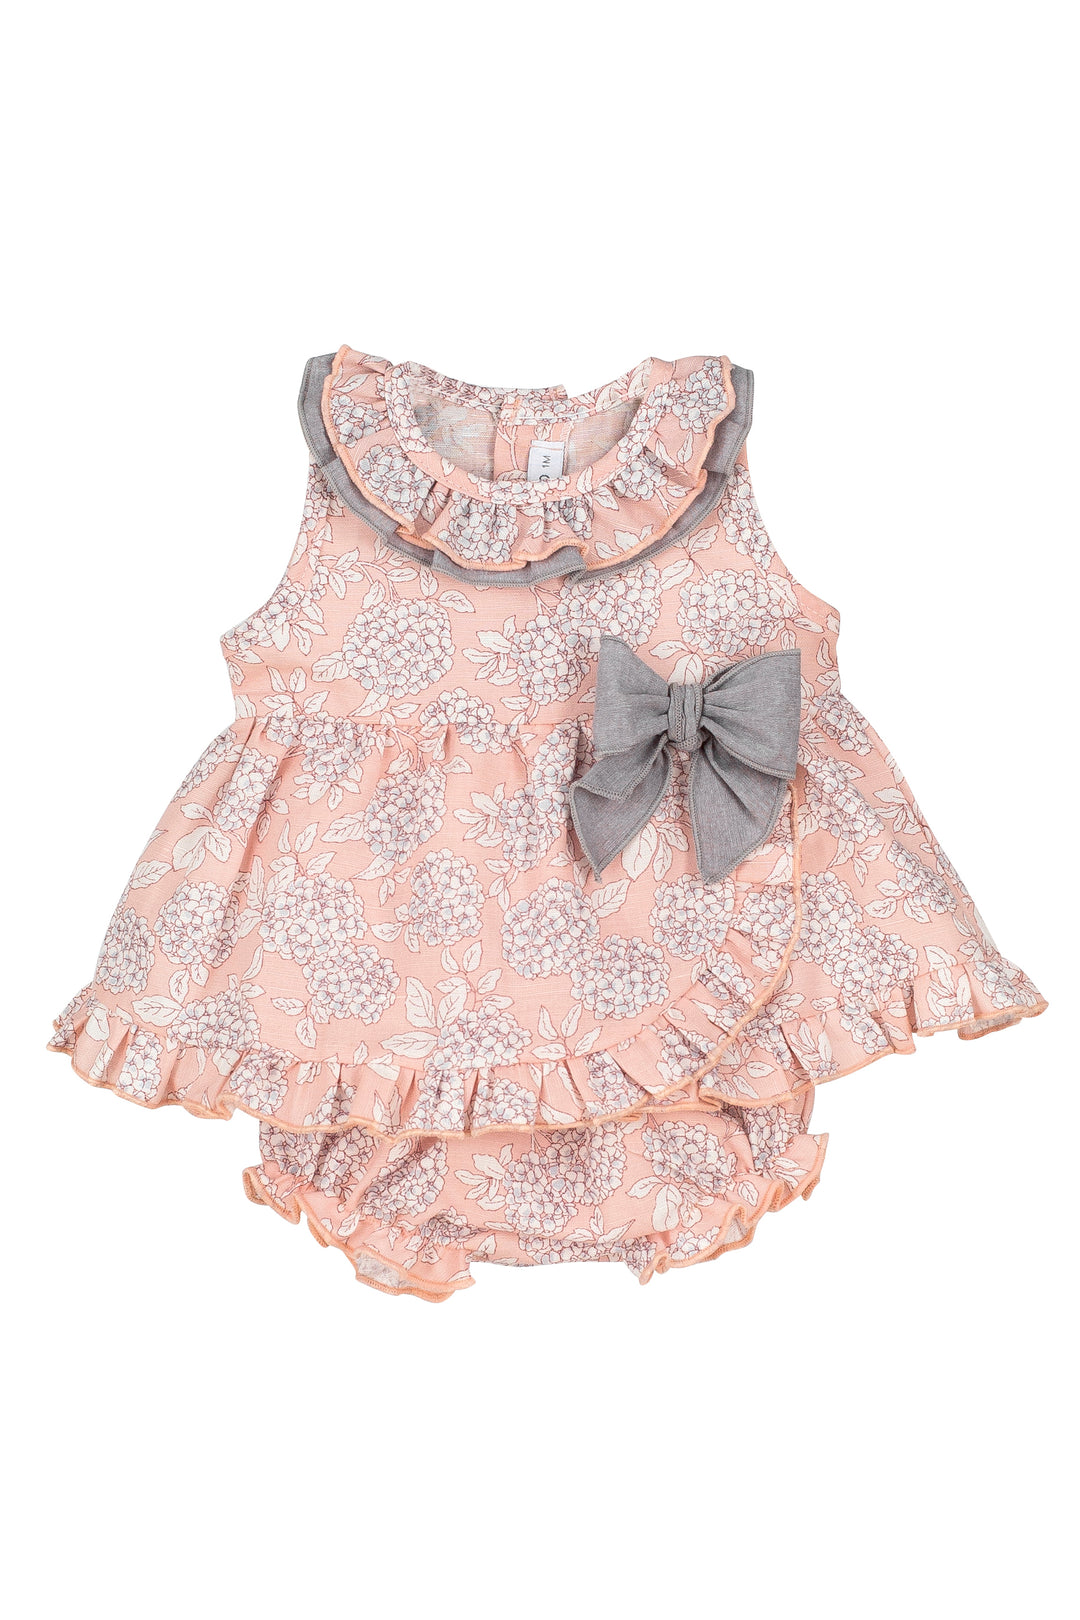 Calamaro Excellentt "Gracie" Dusky Pink Floral Dress & Bloomers | Millie and John